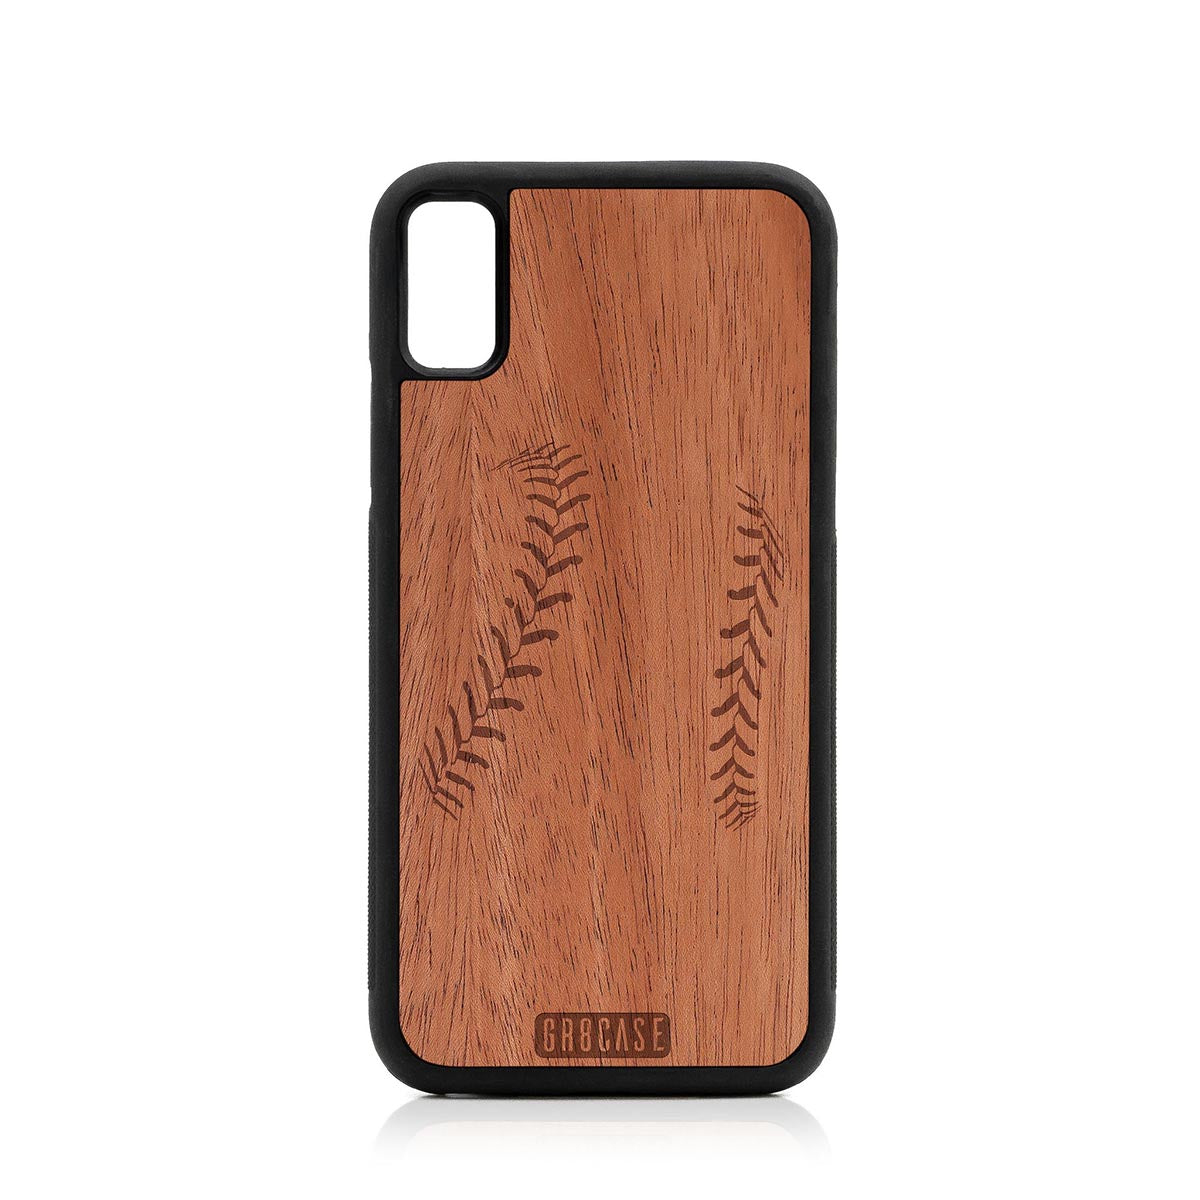 Baseball Stitches Design Wood Case For iPhone XR by GR8CASE